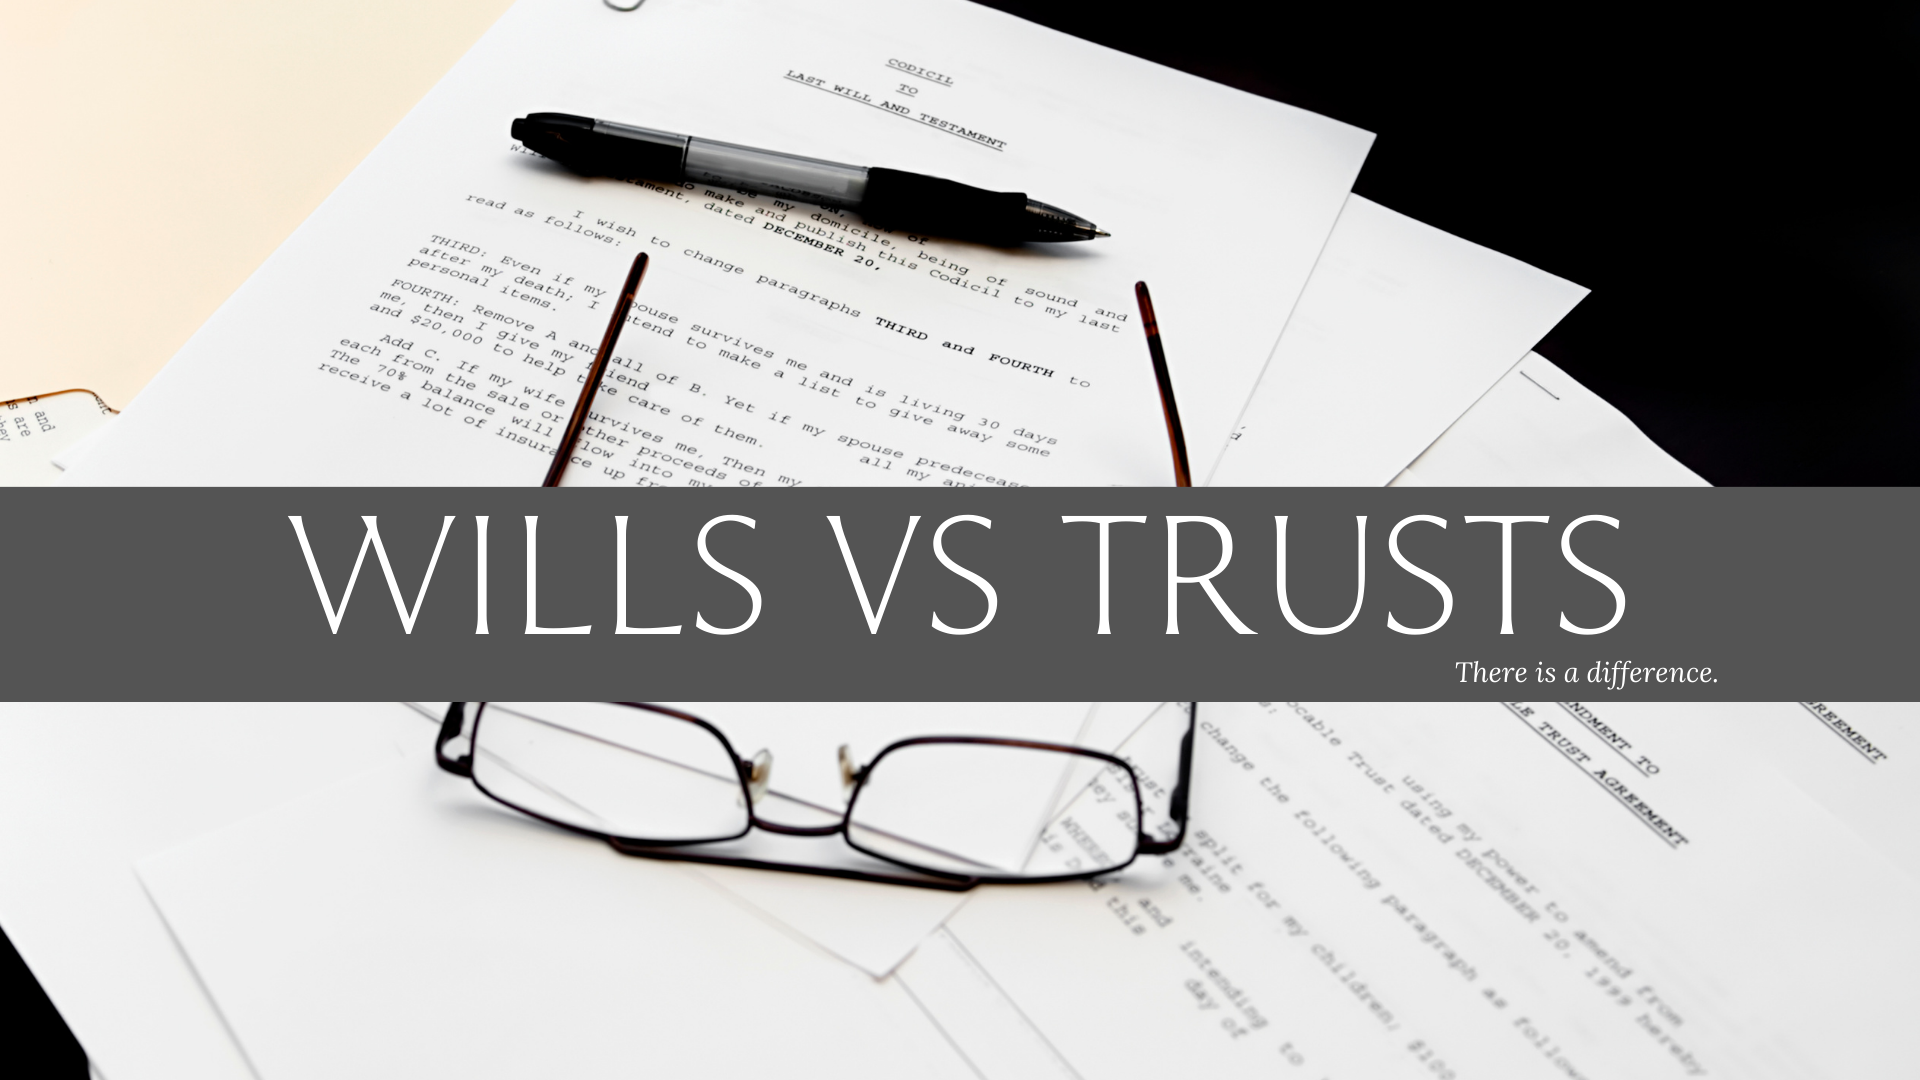 Wills vs Trusts...There is a Difference